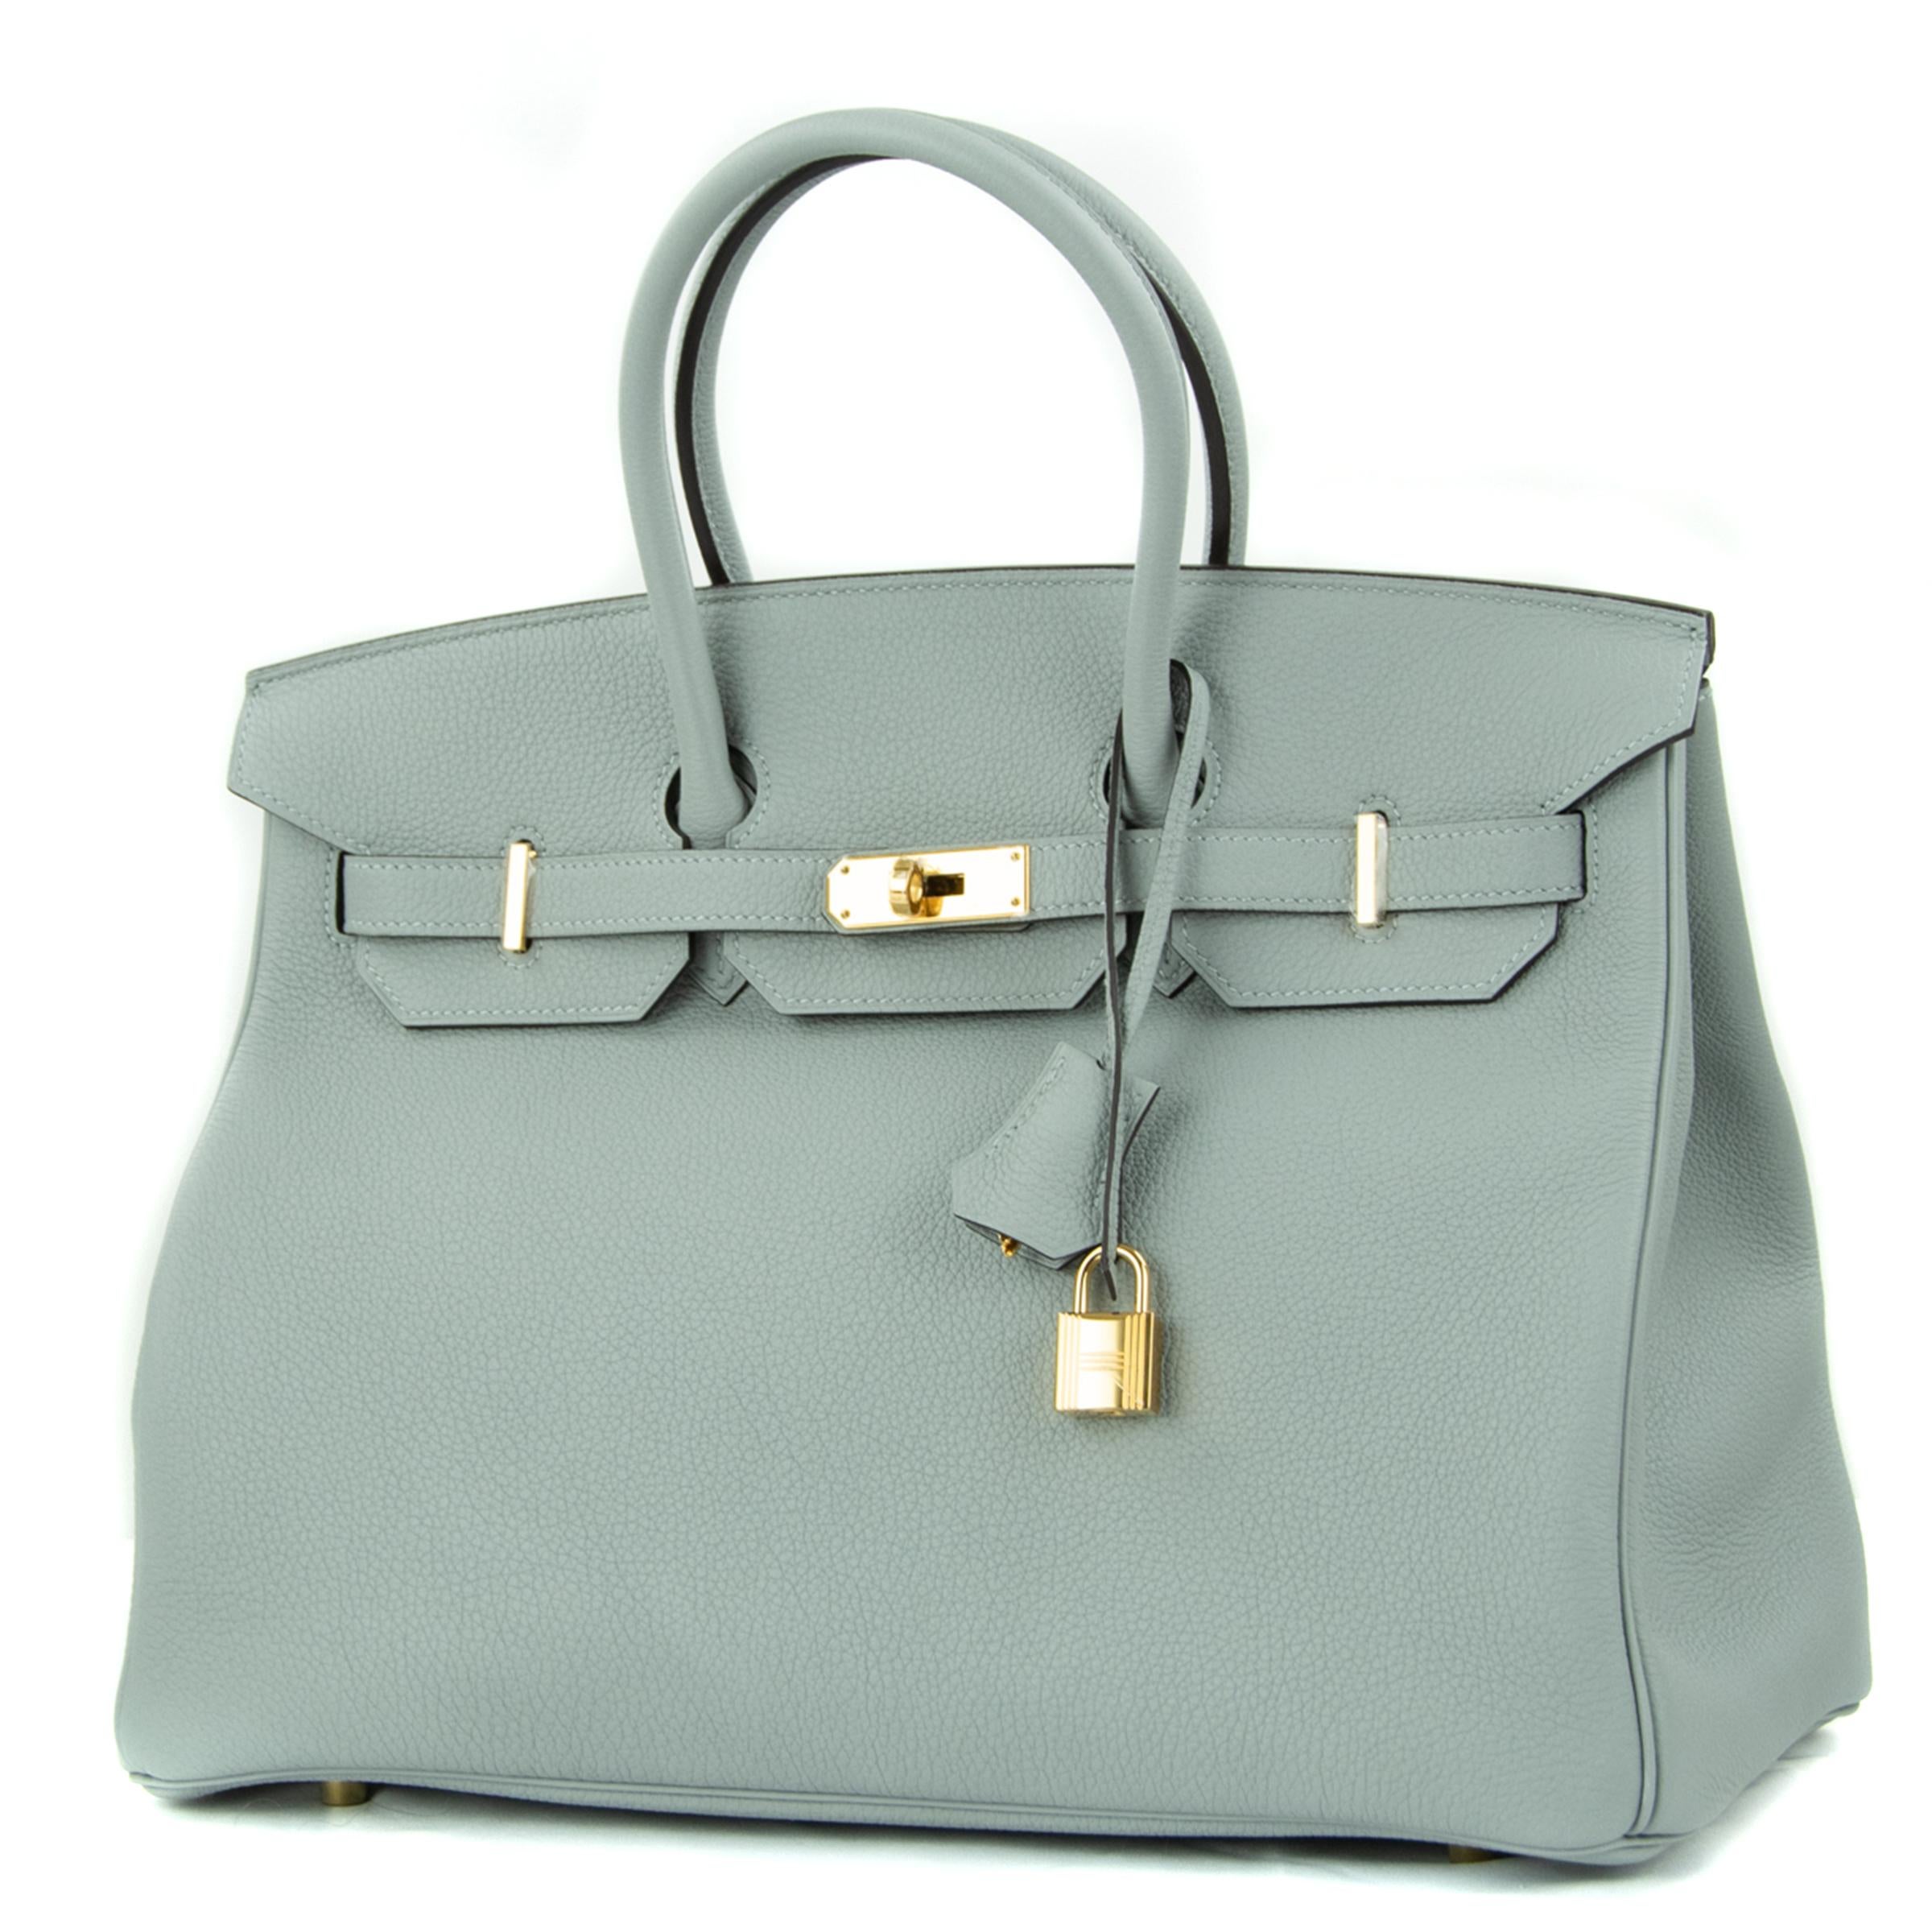 Hermes 30cm Birkin bag in Gris Mouette Togo. This iconic special order Hermes Birkin bag is timeless and chic. Fresh and crisp with gold hardware.

    Condition: New or Never Used
    Made in France
    Bag Measures: 30cm (11.8